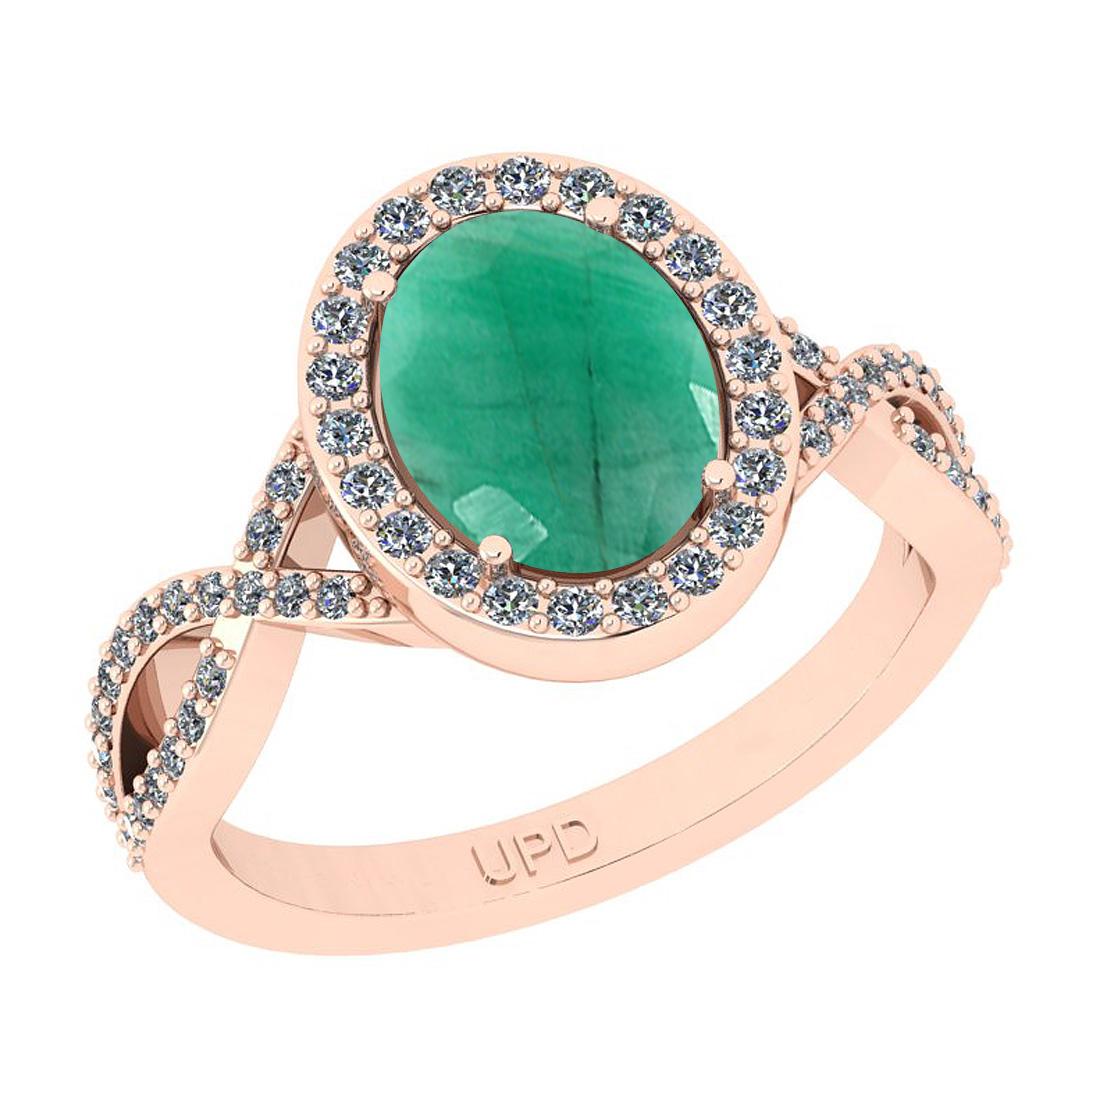 2.91 Ctw SI2/I1 Emerald And Diamond 14K Rose Gold Engagement Ring